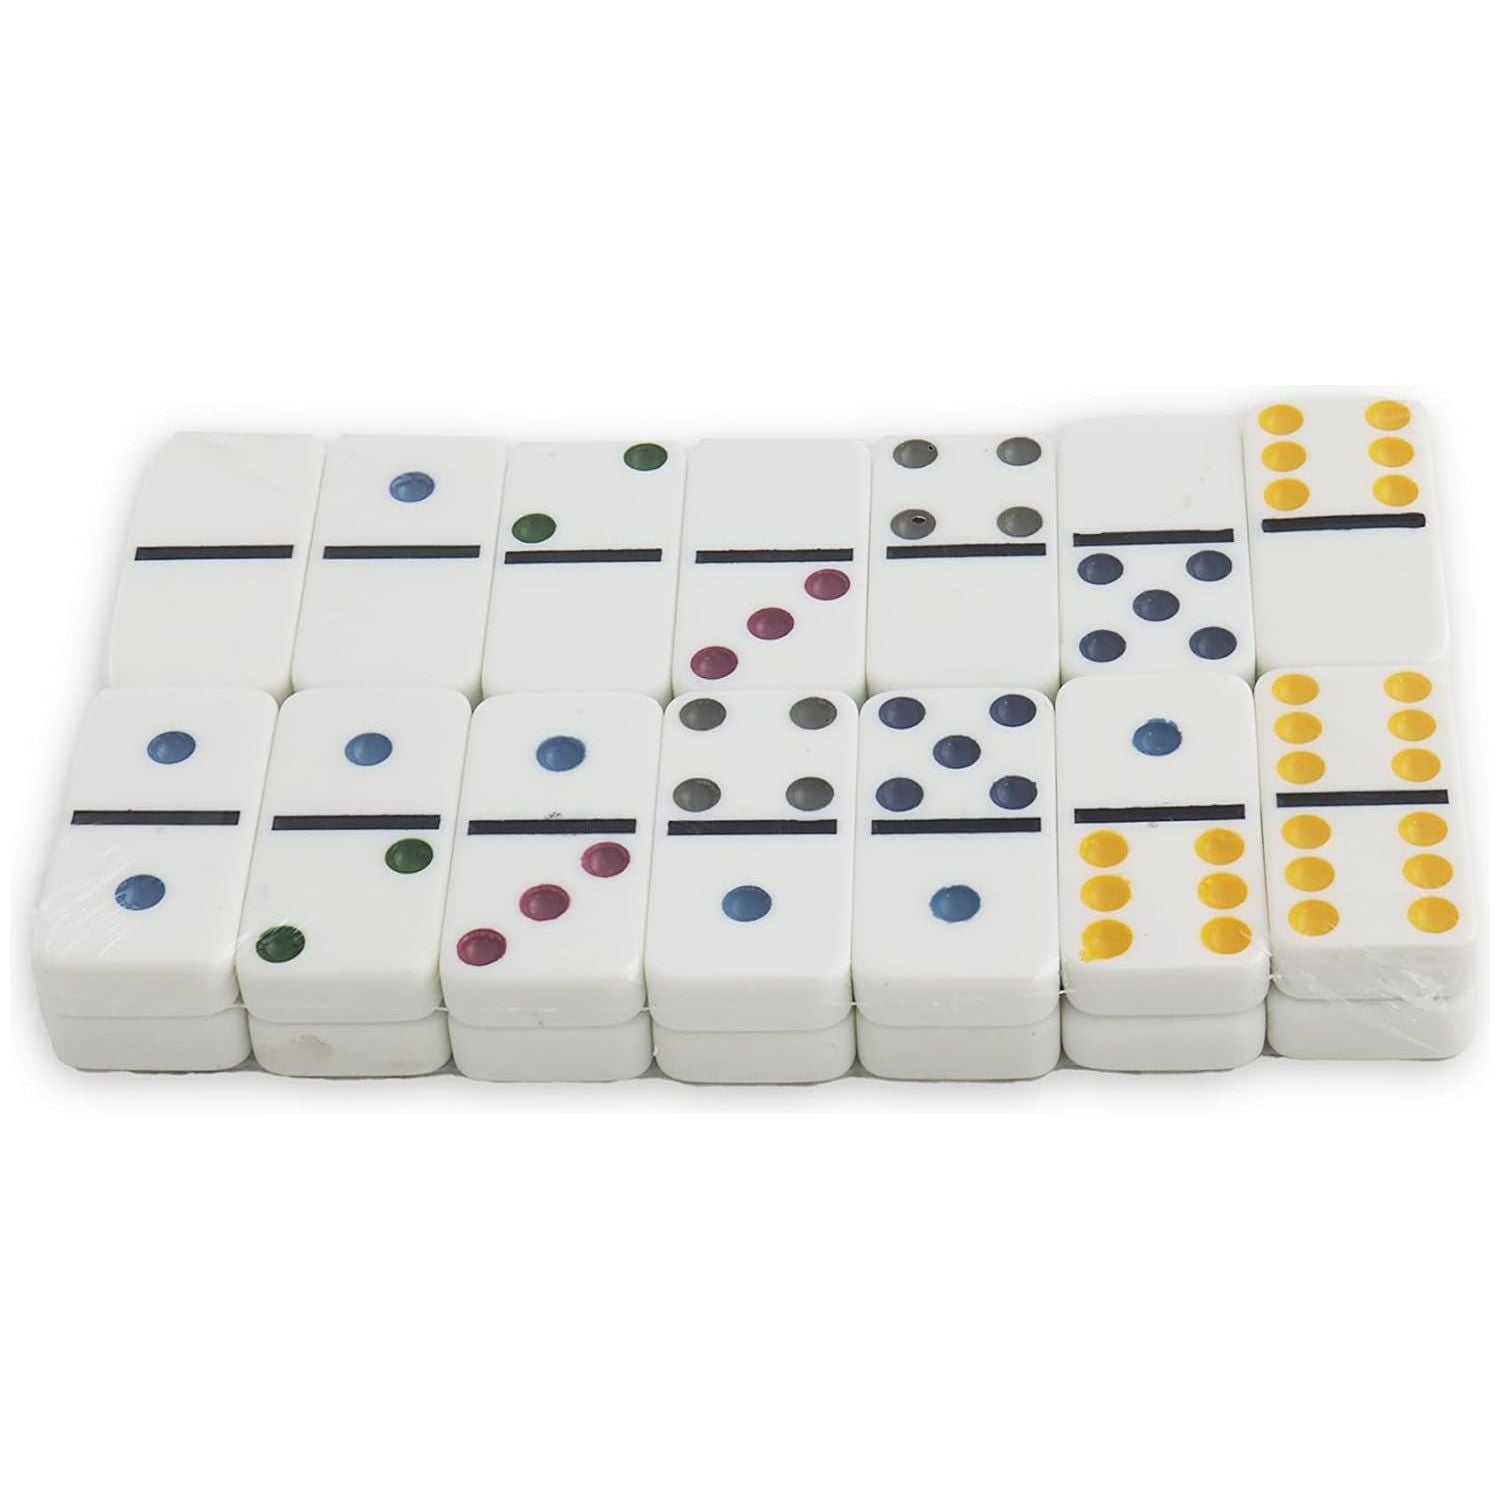 Double six color dot dominoes assorted tin box